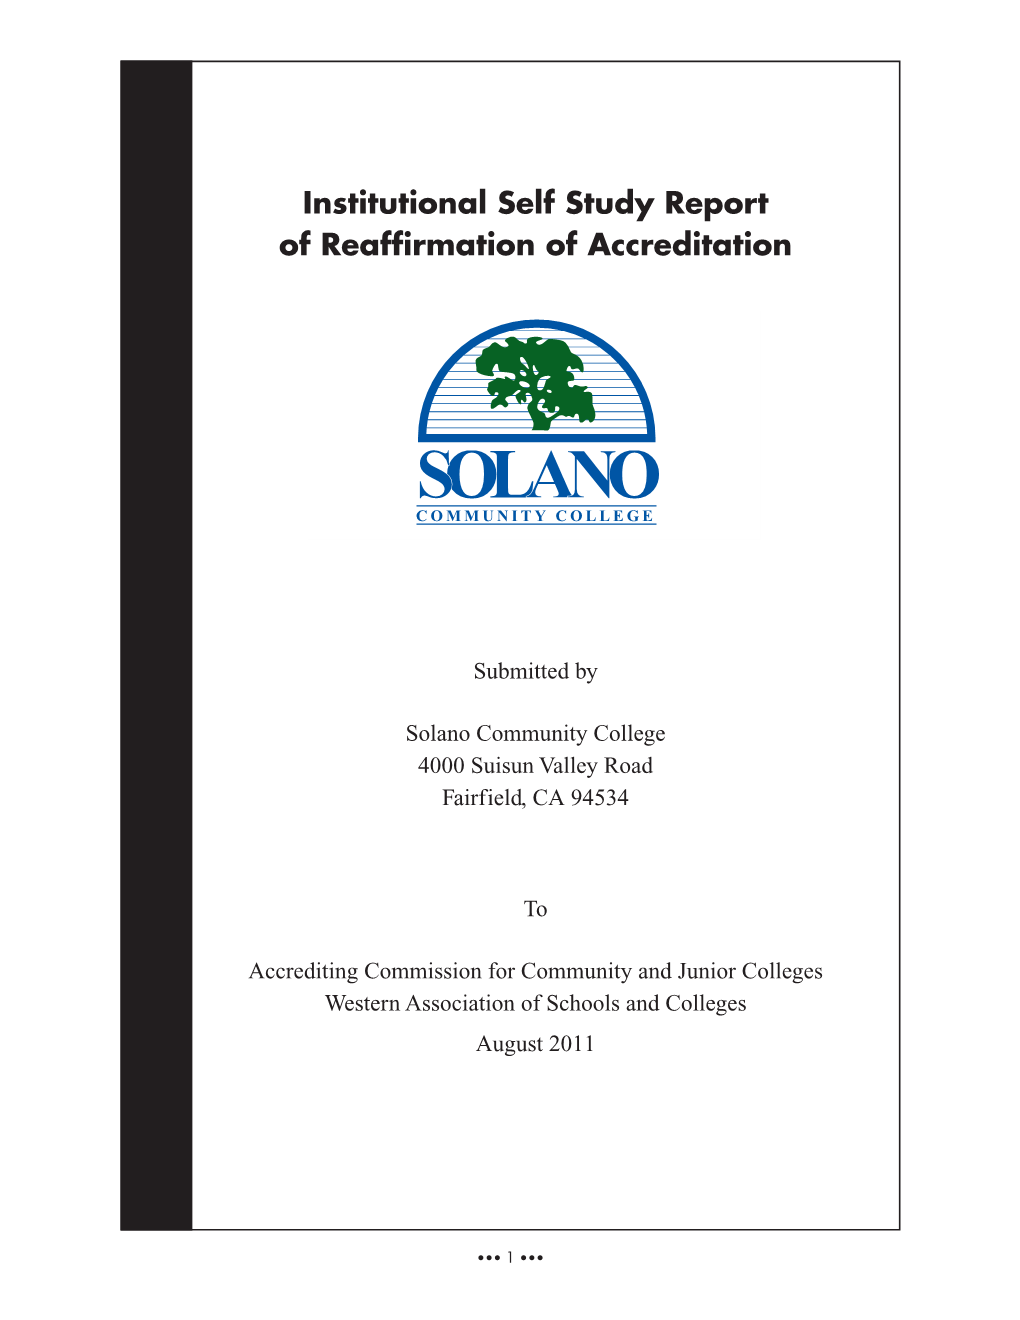 Institutional Self Study Report of Reaffirmation of Accreditation